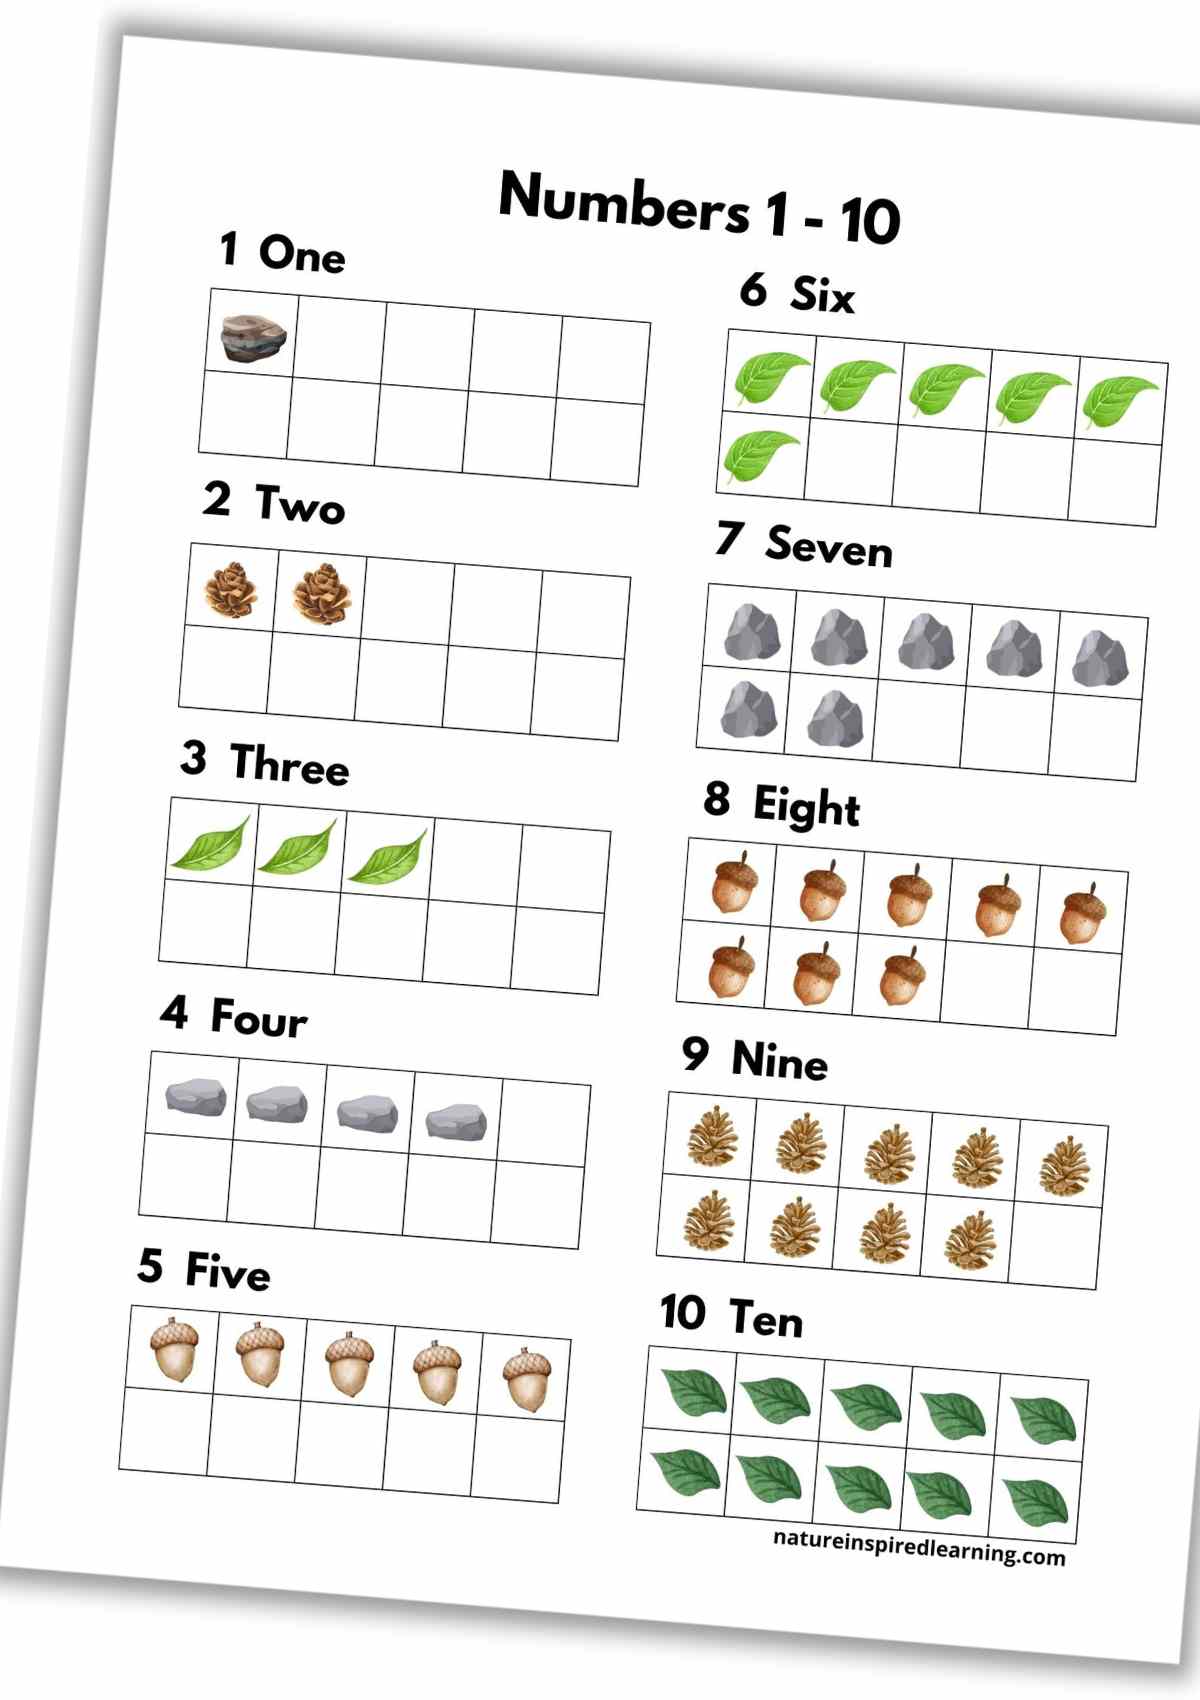 Printed out ten frame printable with numbers 1-10 represented in each frame using nature items including acorns, leaves, and pebbles.